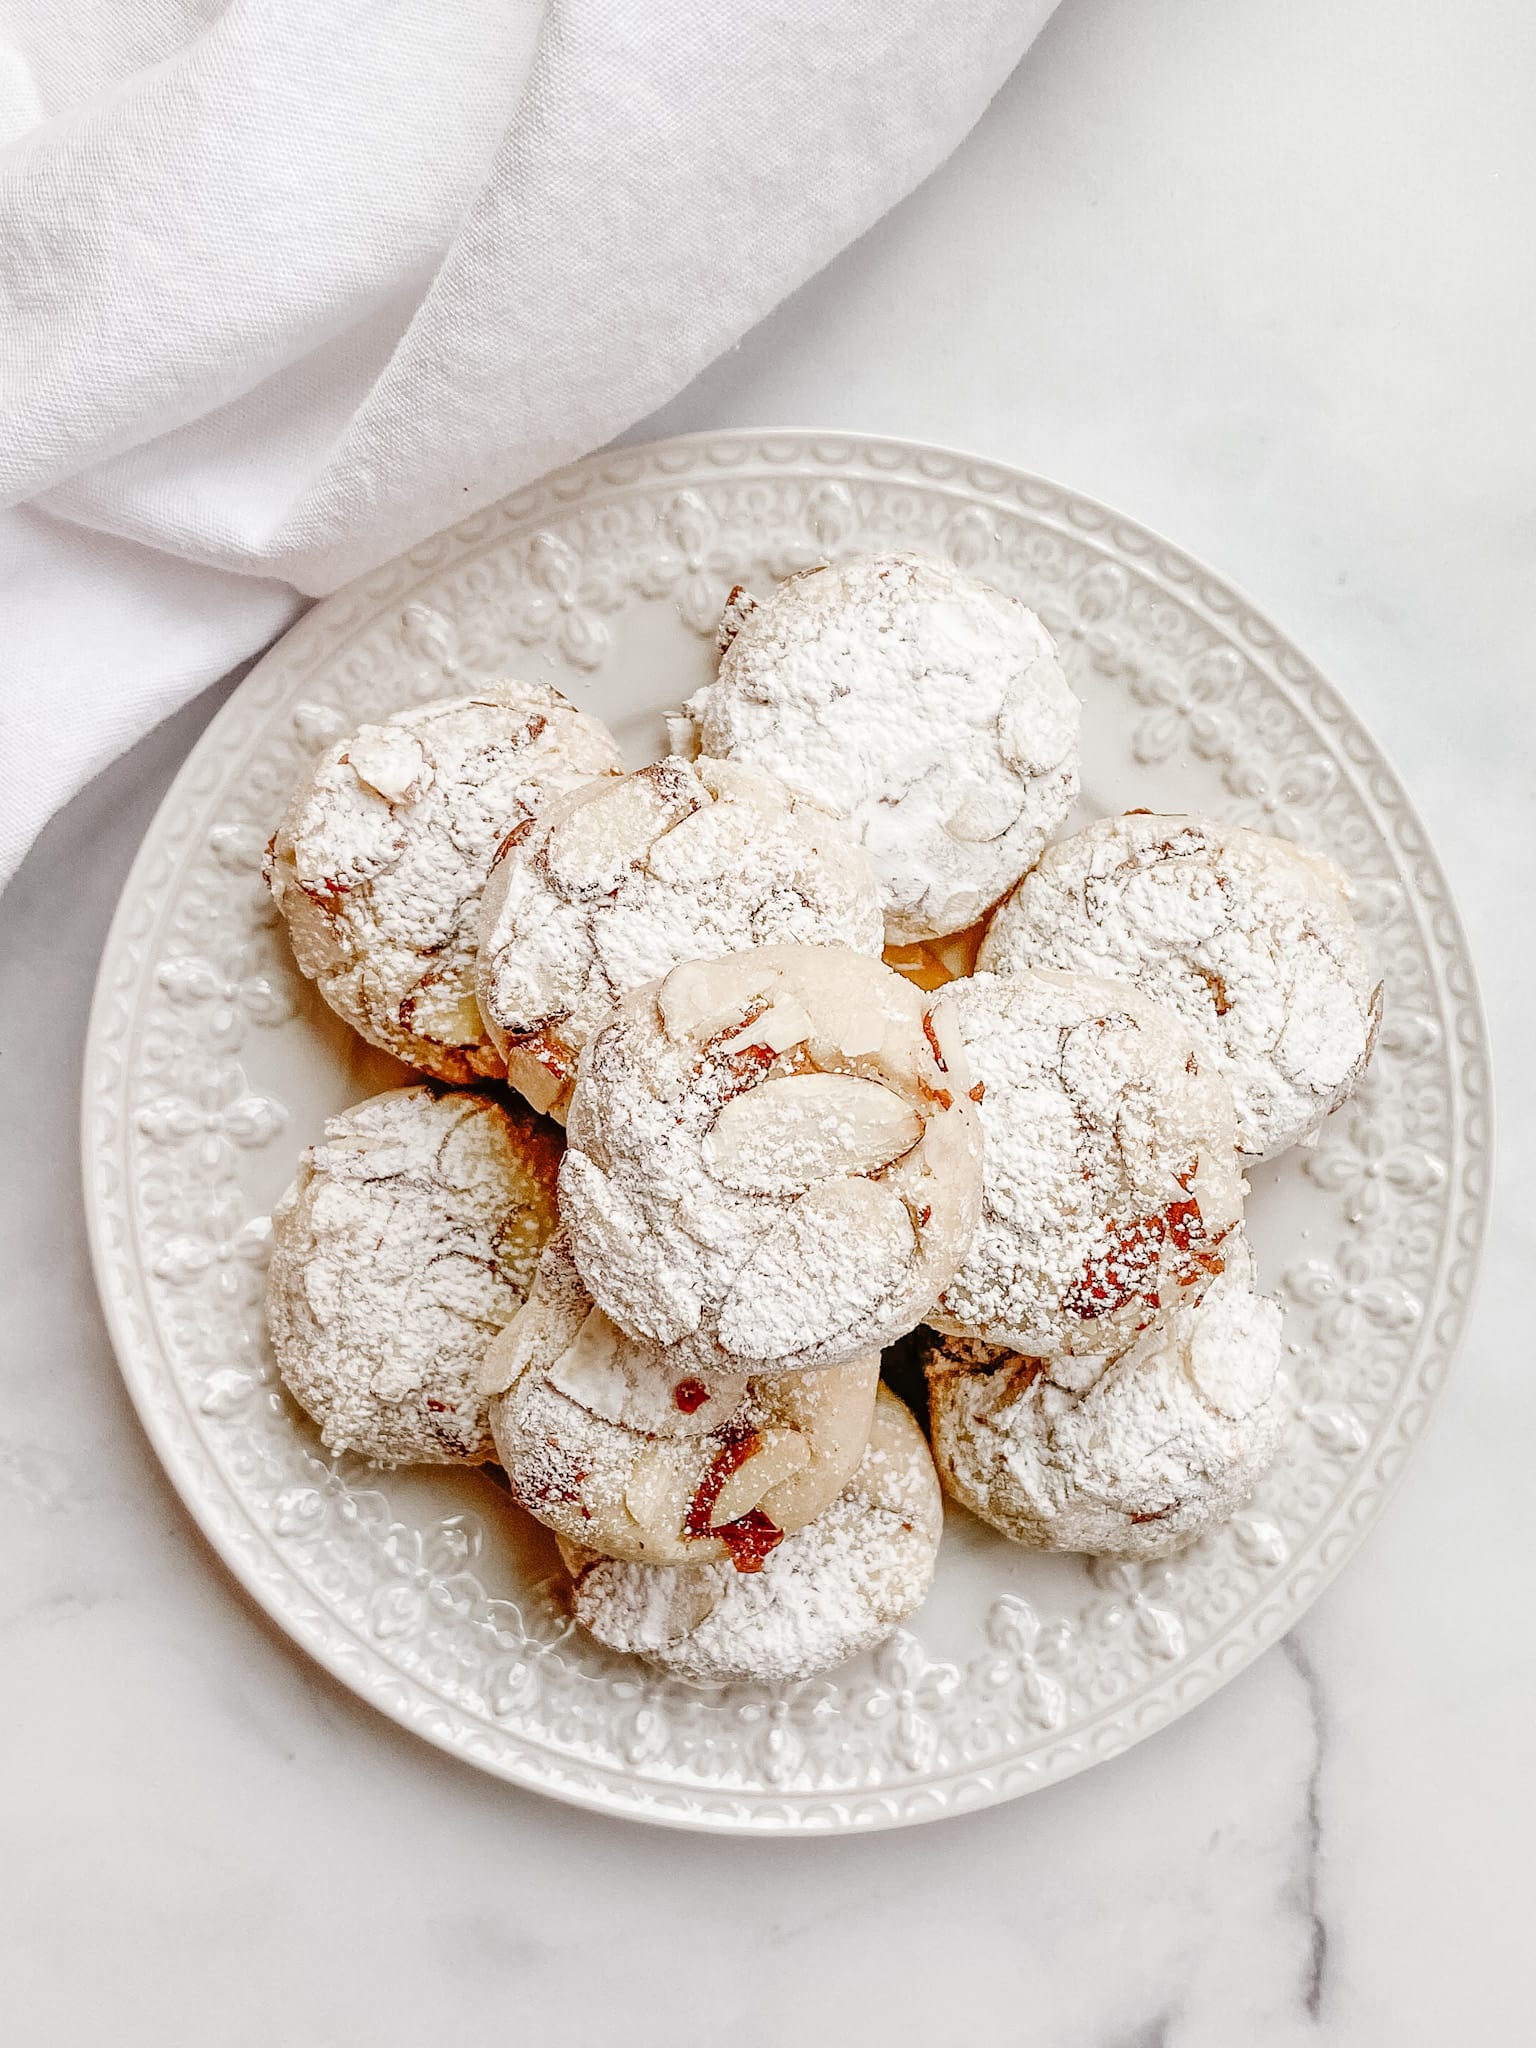 A stack of gluten-free amaretti cookies on a white ceramic plate, being viewed from above.